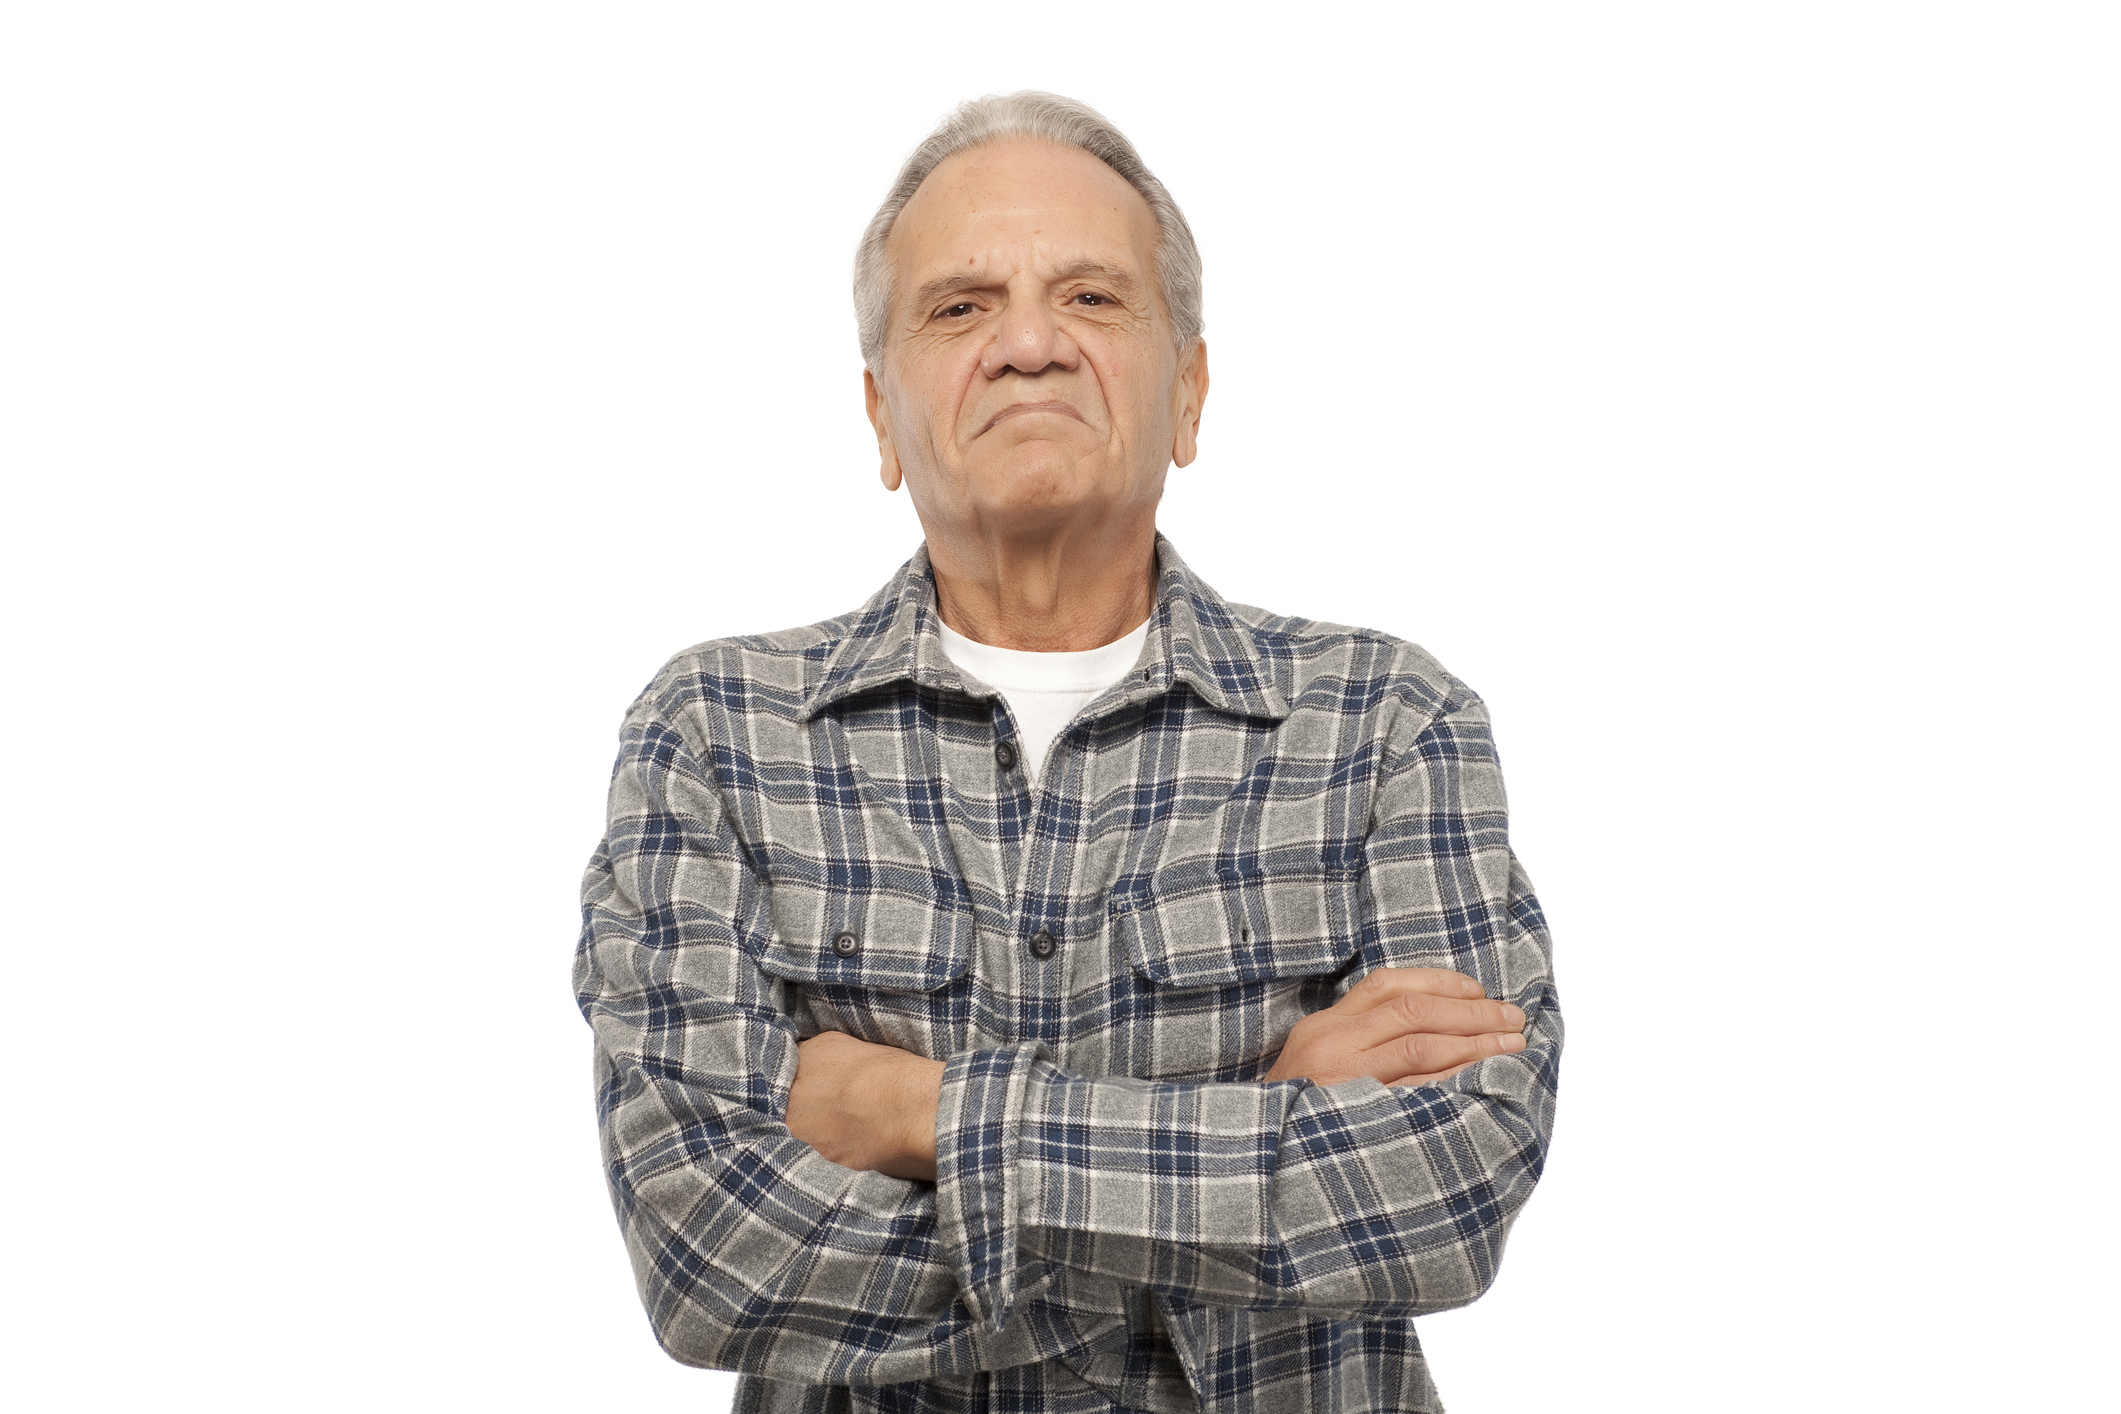 Elderly man with arms crossed wearing a plaid shirt over a white tee, expressing slight discontent.
